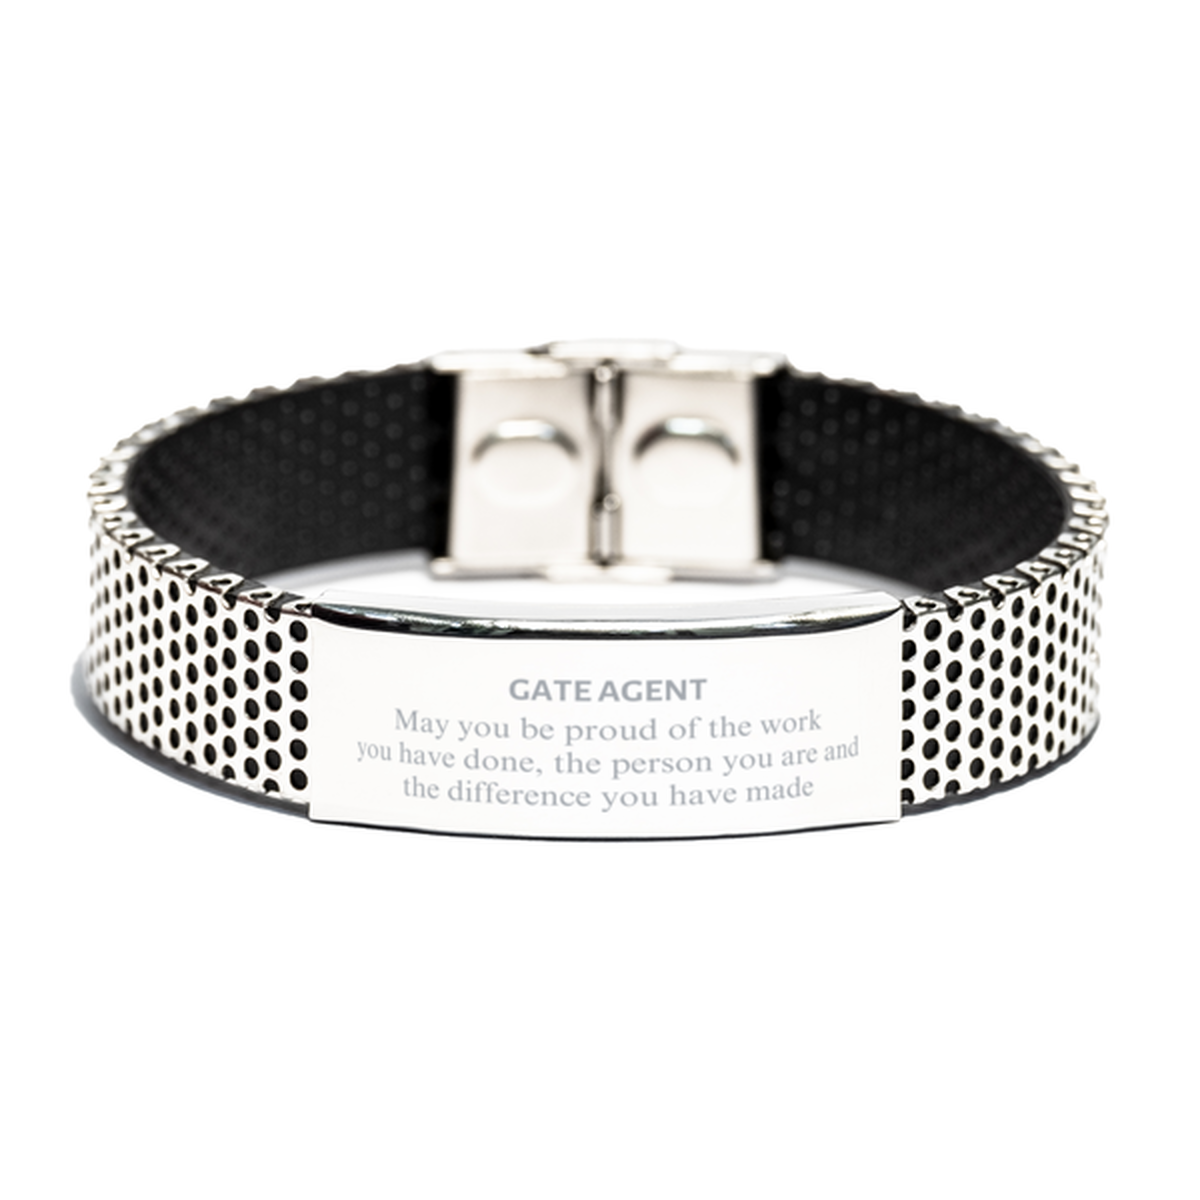 Gate Agent May you be proud of the work you have done, Retirement Gate Agent Stainless Steel Bracelet for Colleague Appreciation Gifts Amazing for Gate Agent